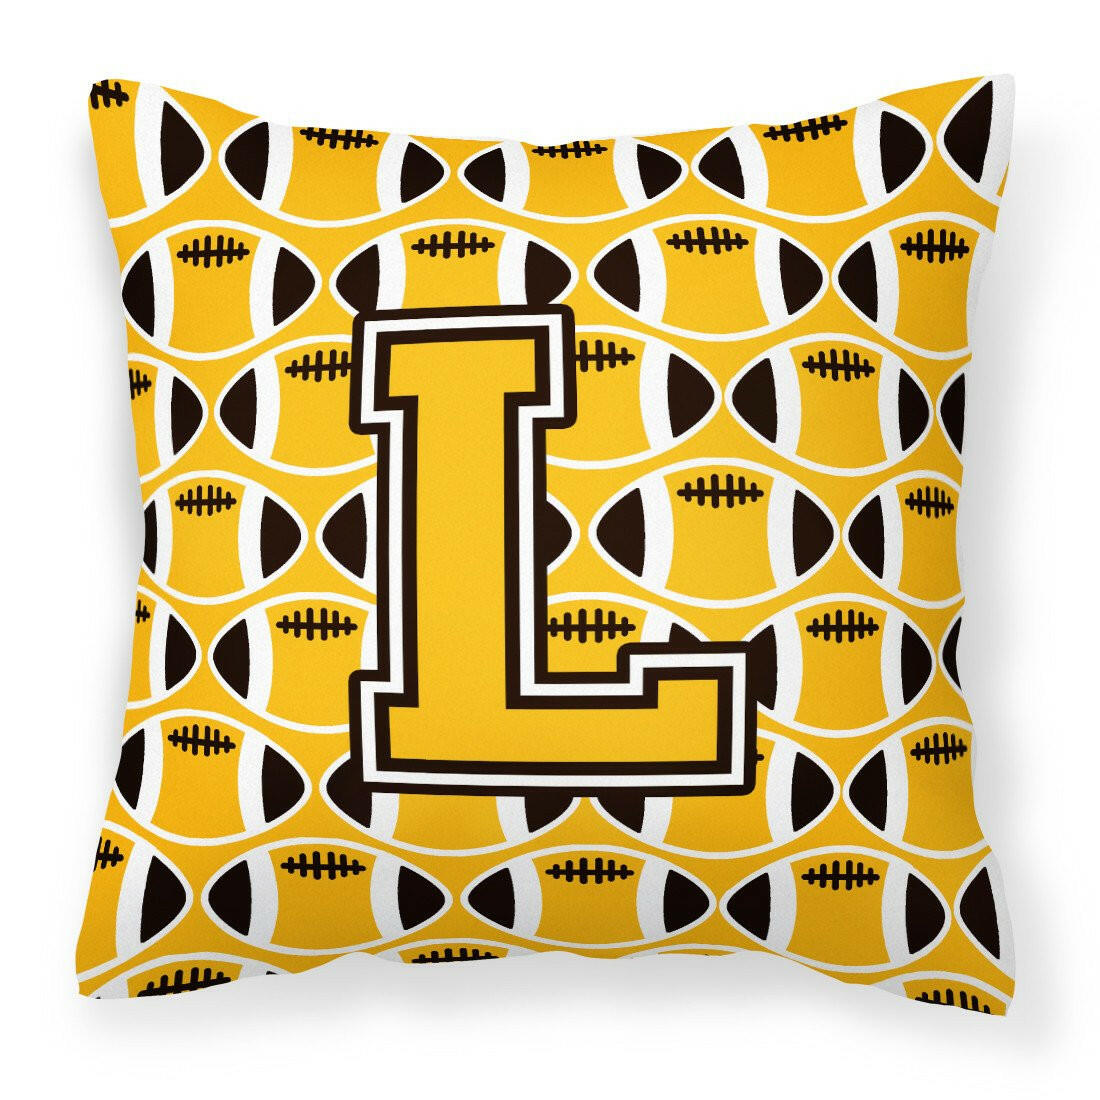 Letter L Football Black, Old Gold and White Fabric Decorative Pillow CJ1080-LPW1414 by Caroline's Treasures